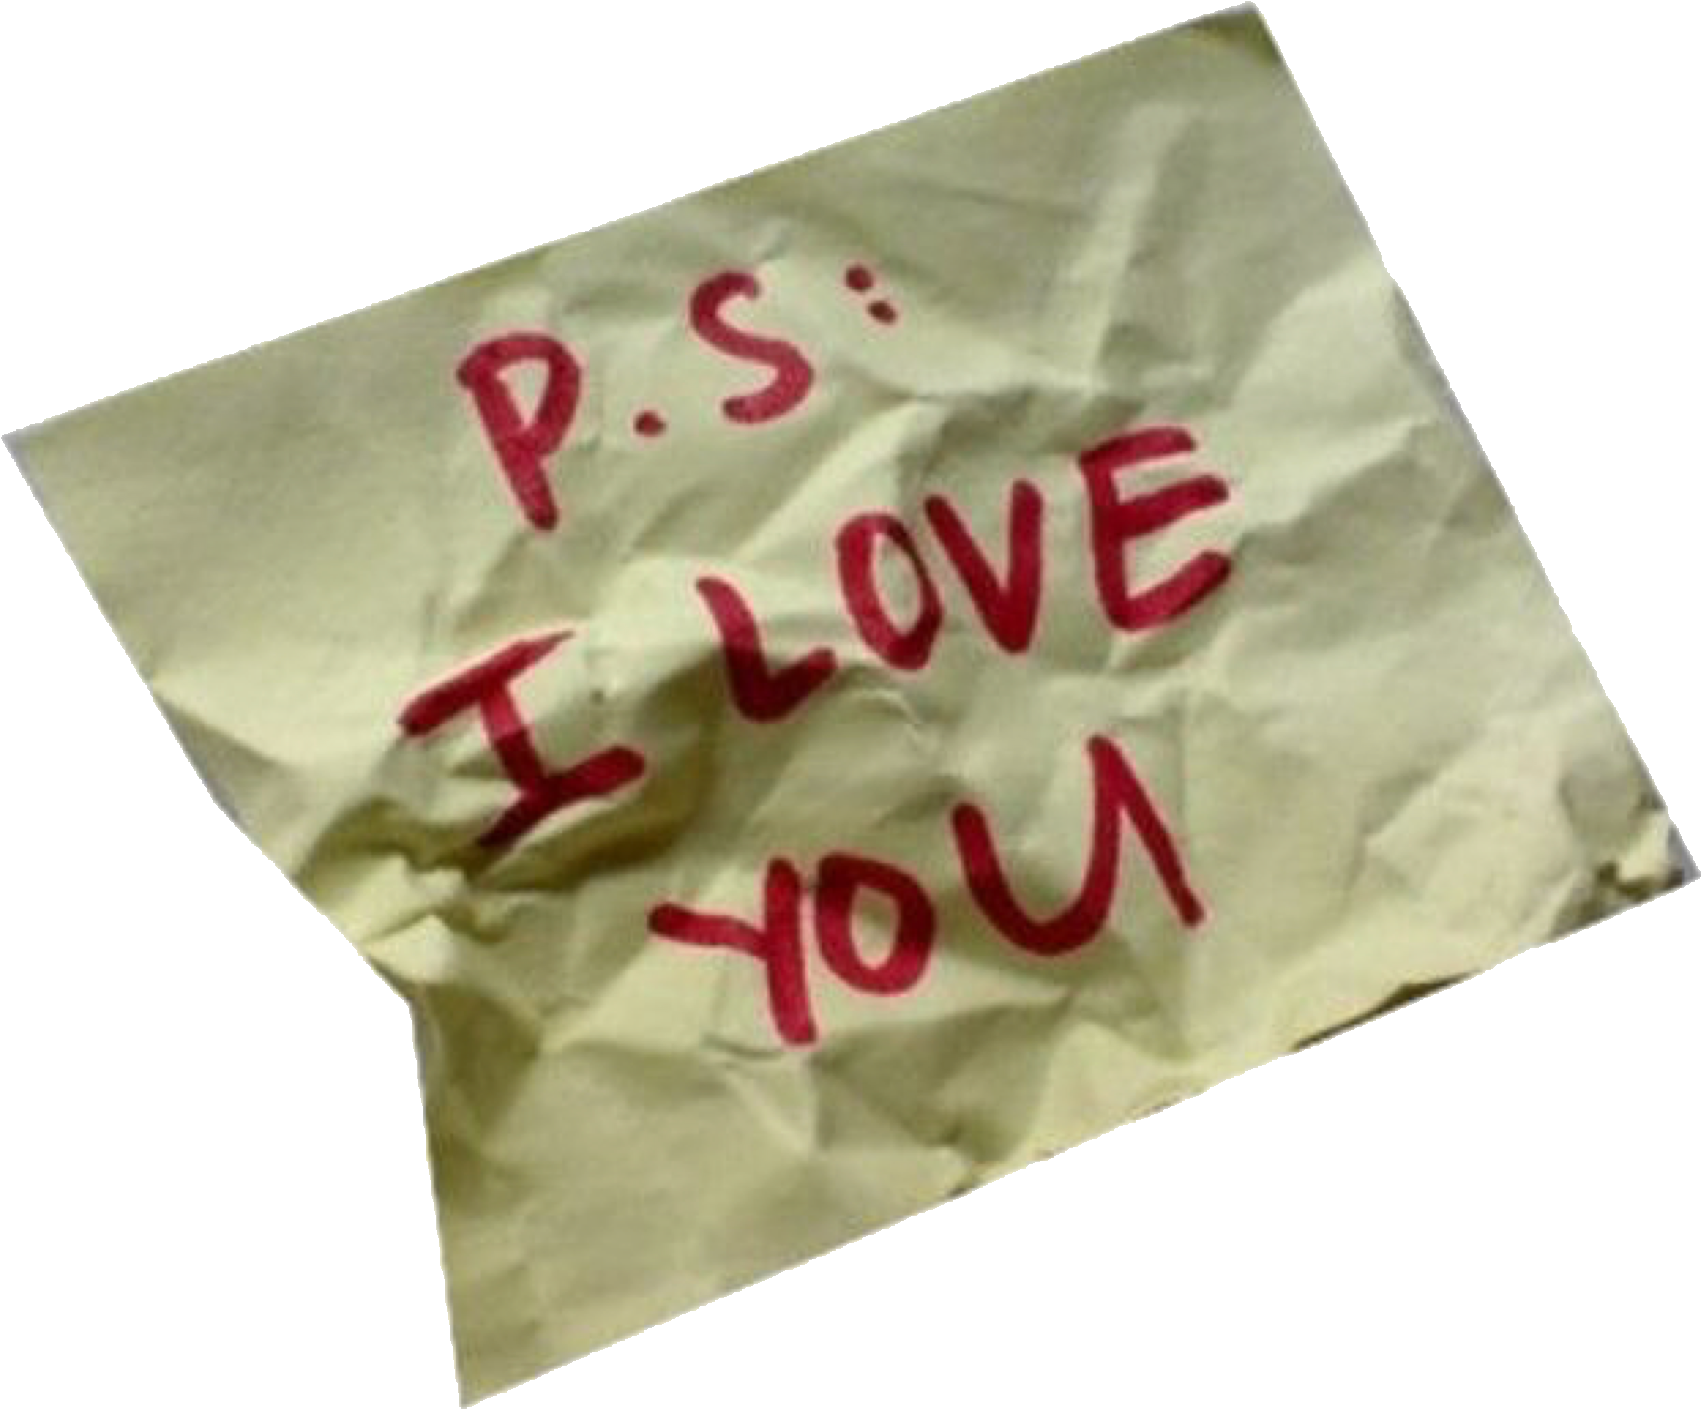 A Yellow Piece Of Paper With Red Writing On It